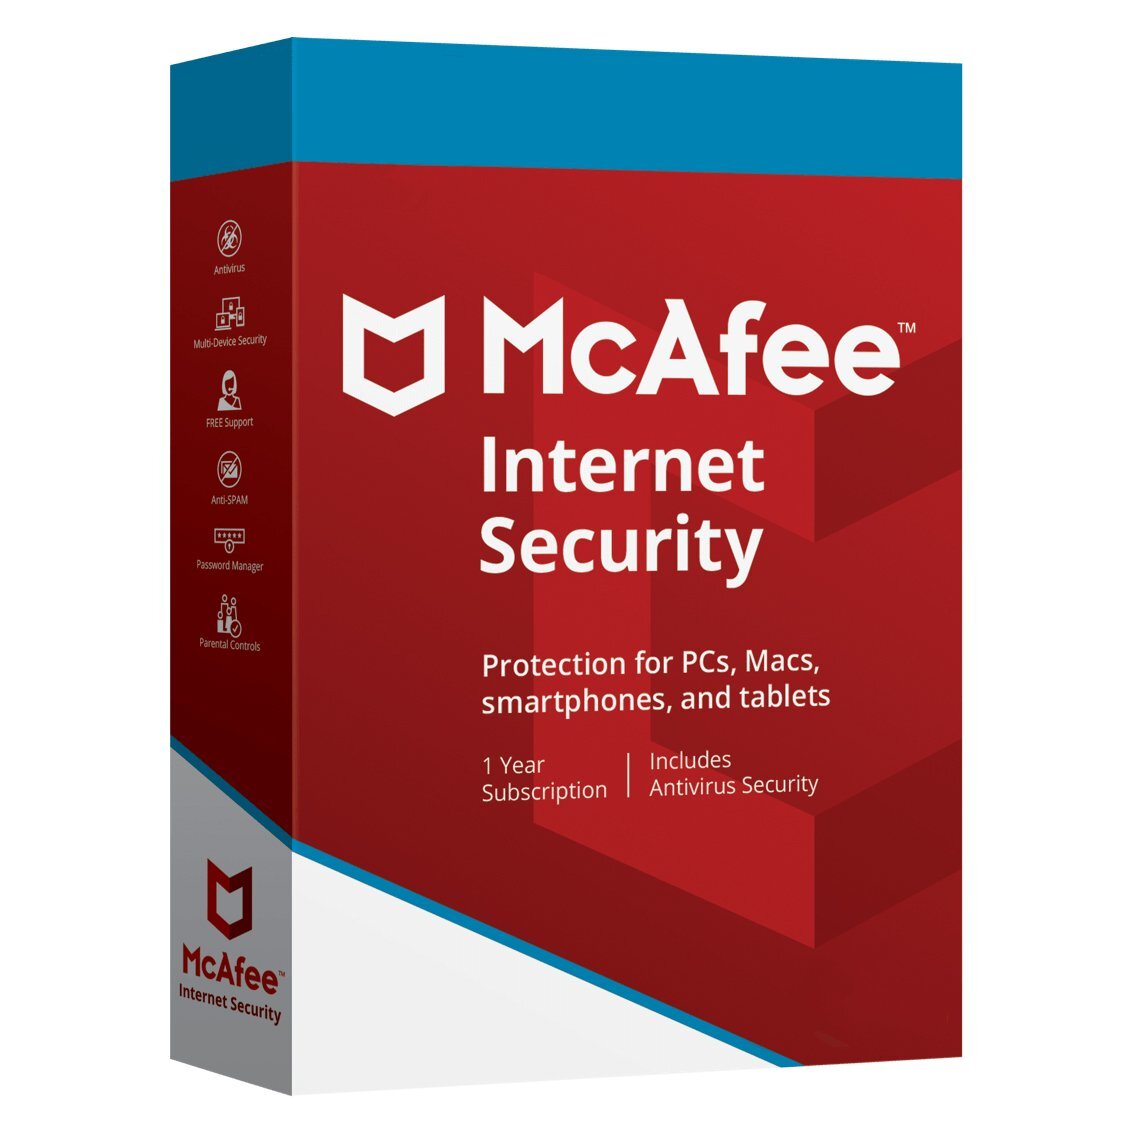 McAfee download Internet Security - 1 Year - Windows + Android + Apple One Device